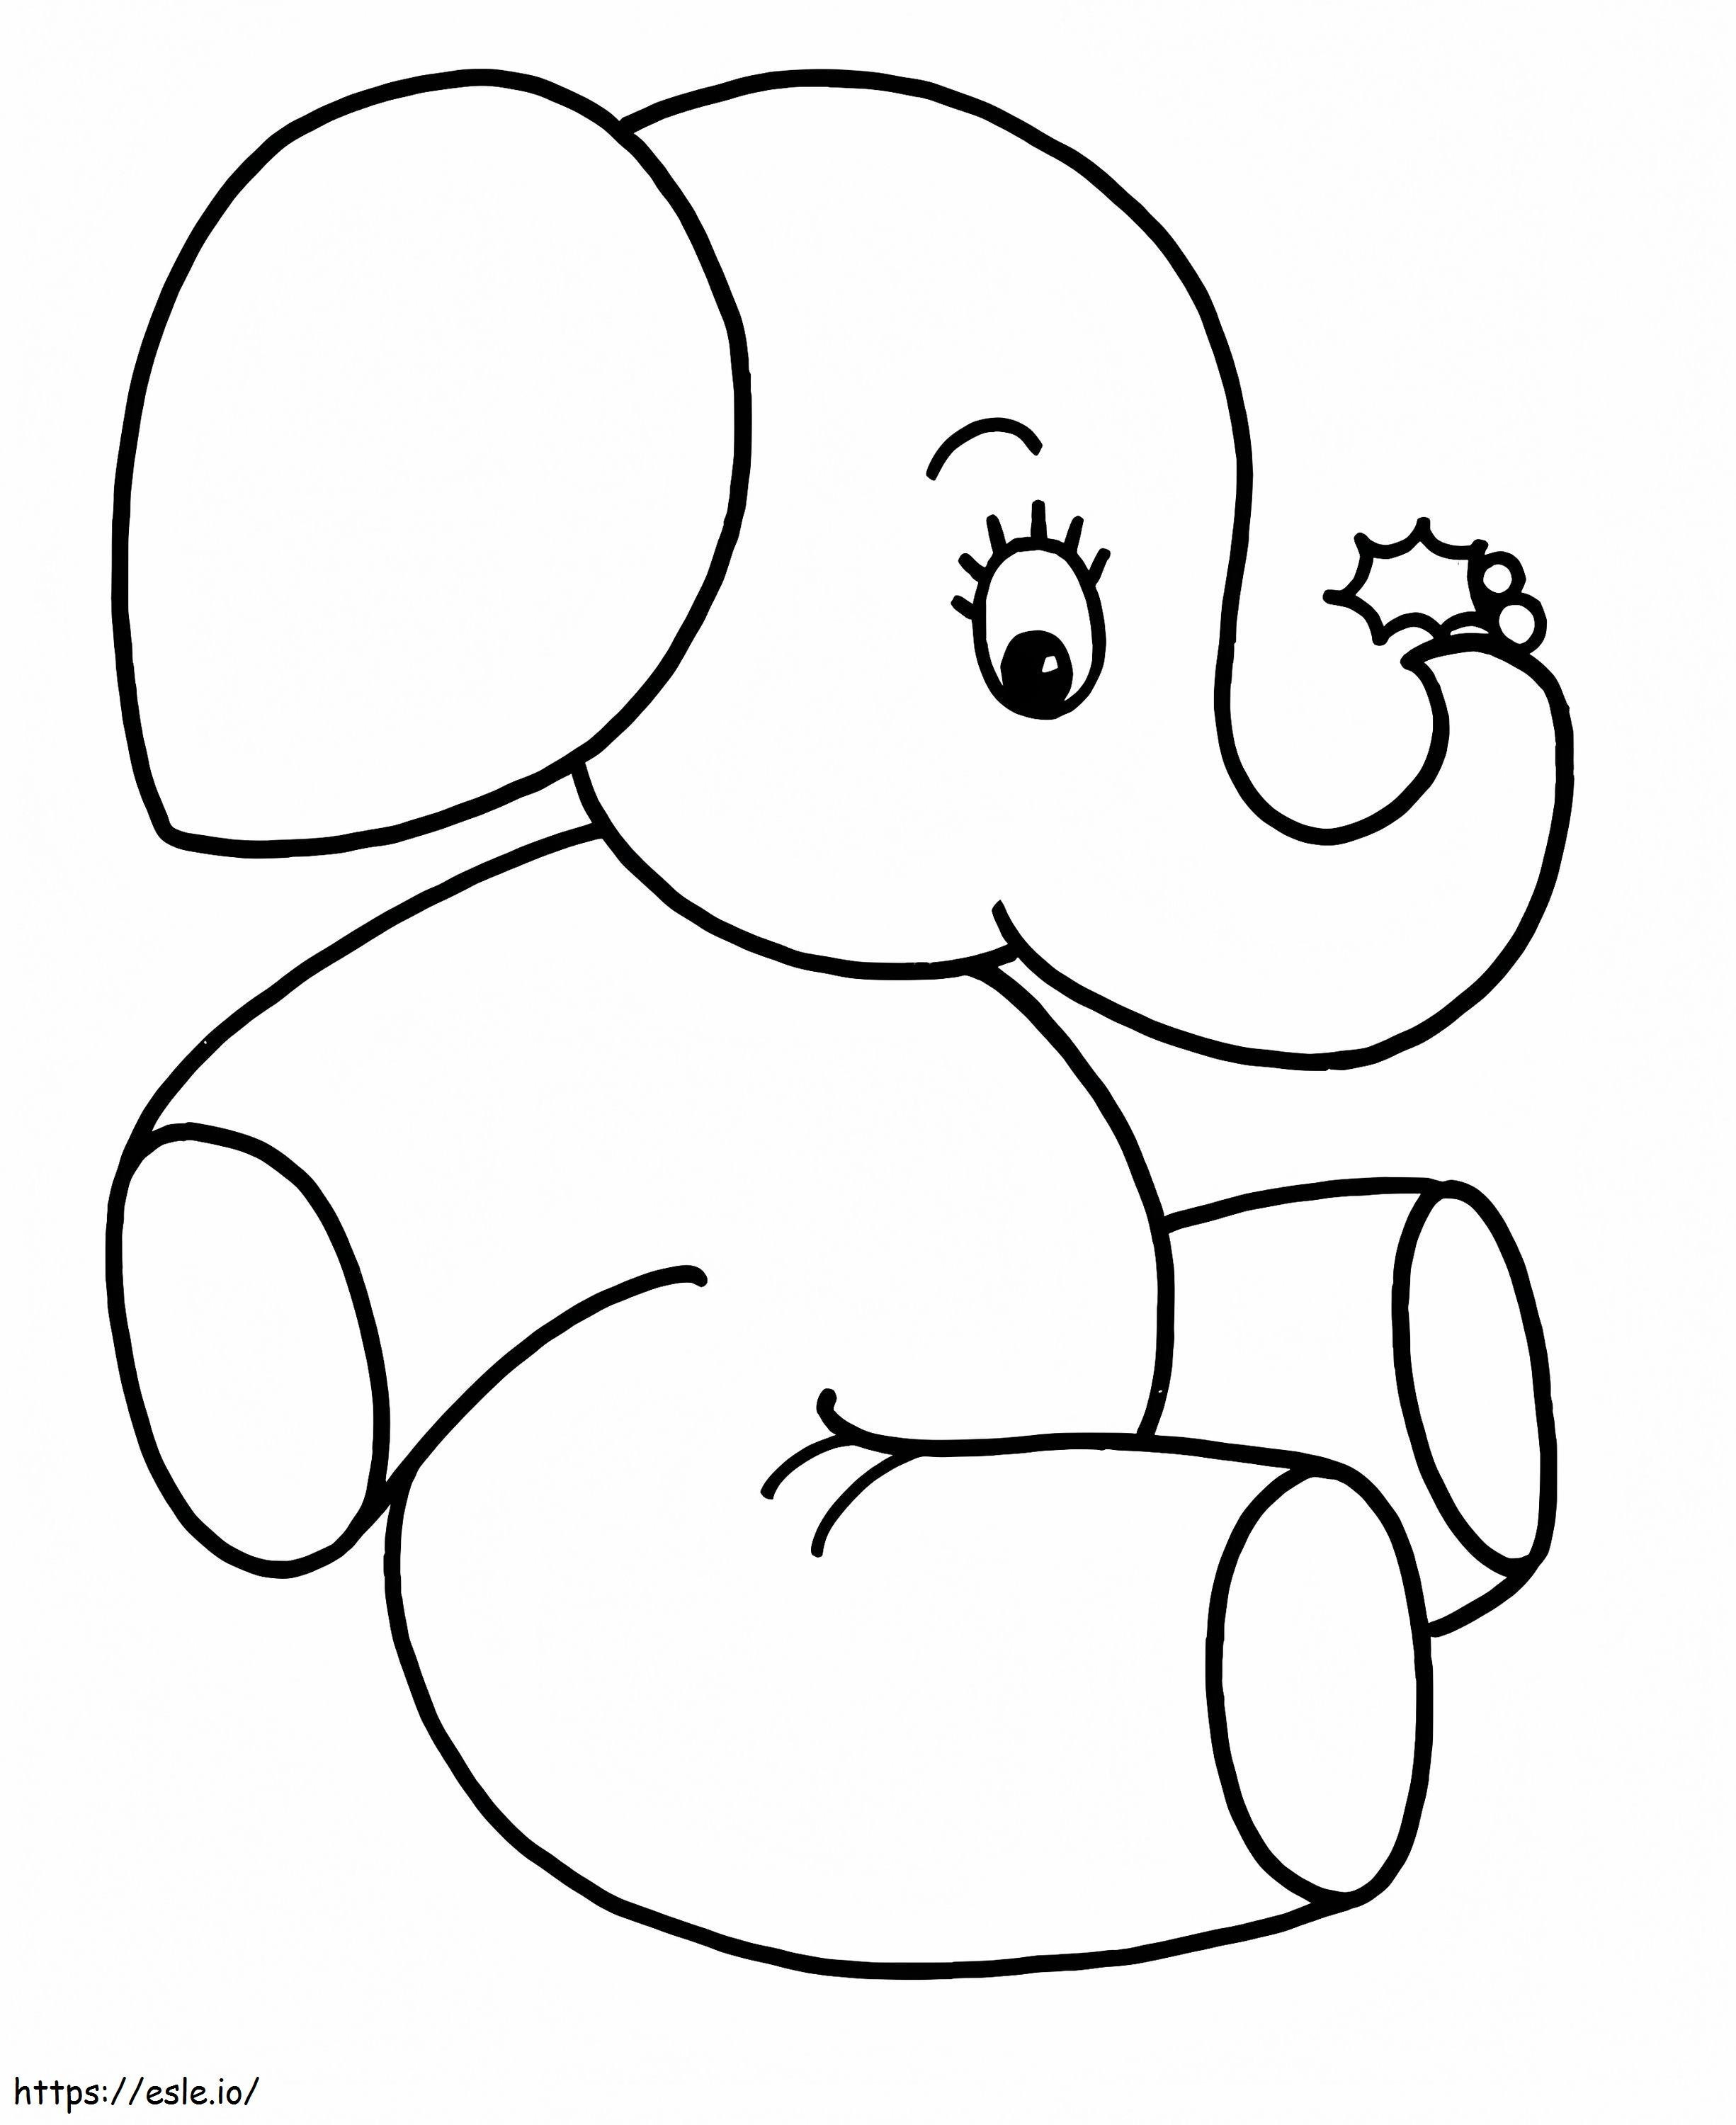 Easy Elephant Sitting coloring page